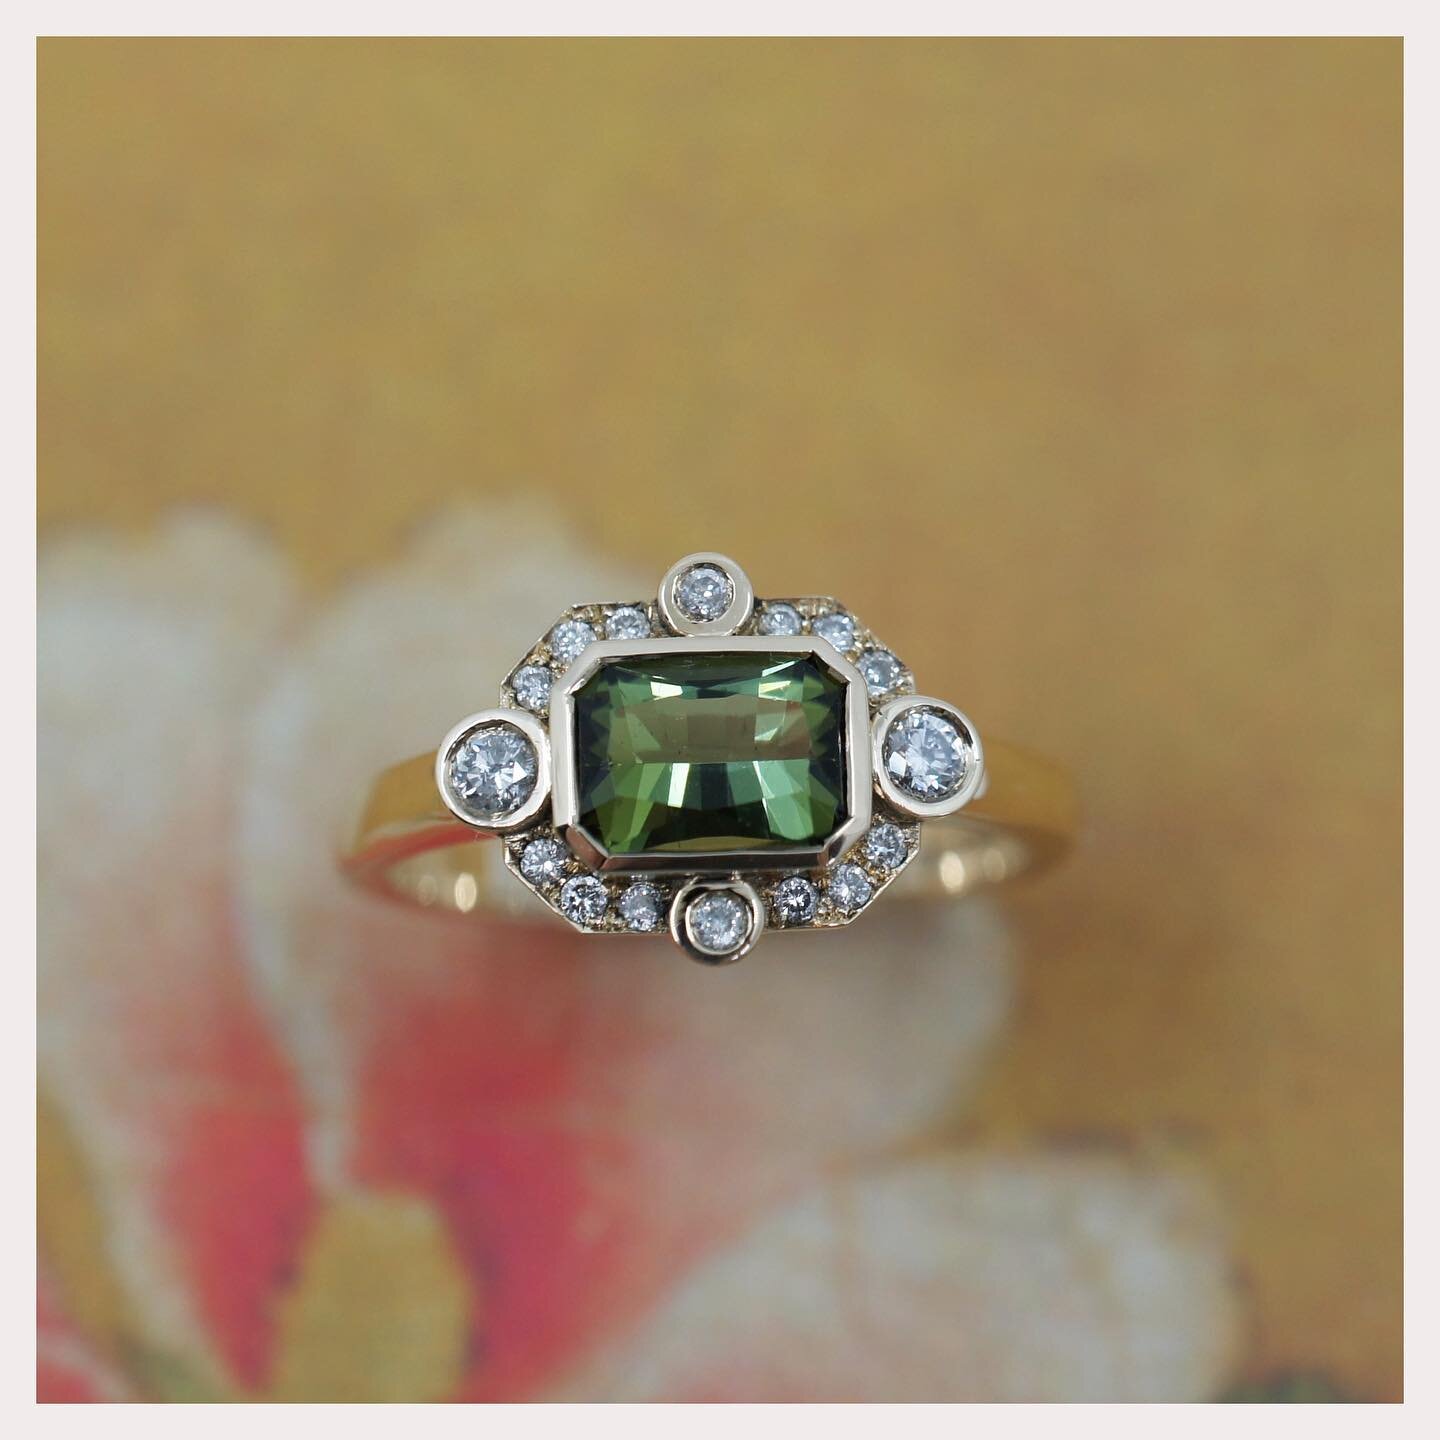 A barion cut jungle green tourmaline, set into this decorative diamond cluster ring 💫 

We worked with Jane to create a bespoke ring to celebrate her birthday, incorporating some family jewellery of hers ✨ 

Swipe to see the before and some of the m